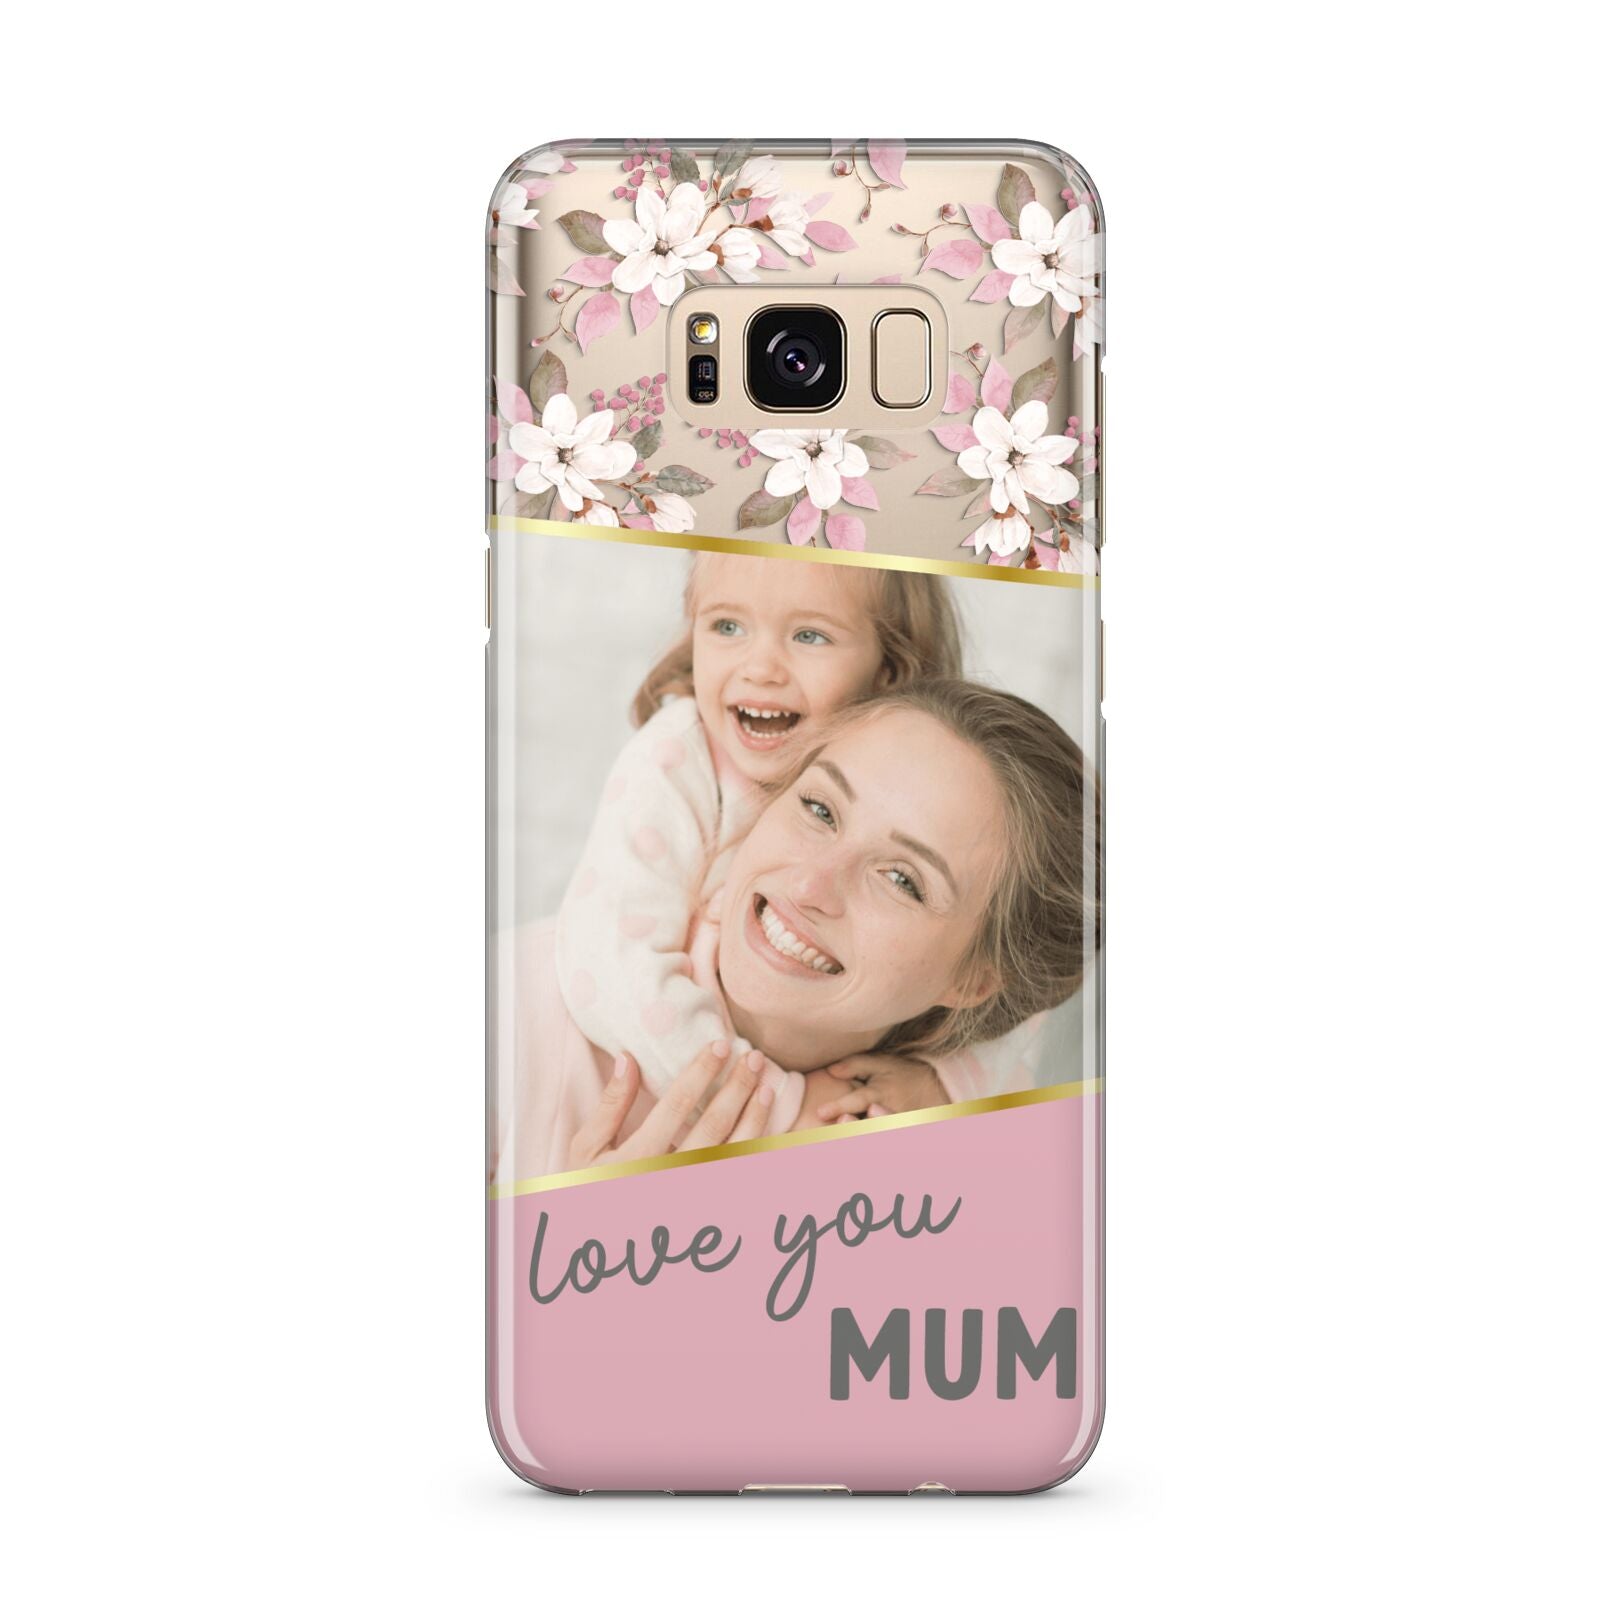 Personalised Love You Mum Samsung Galaxy S8 Plus Case